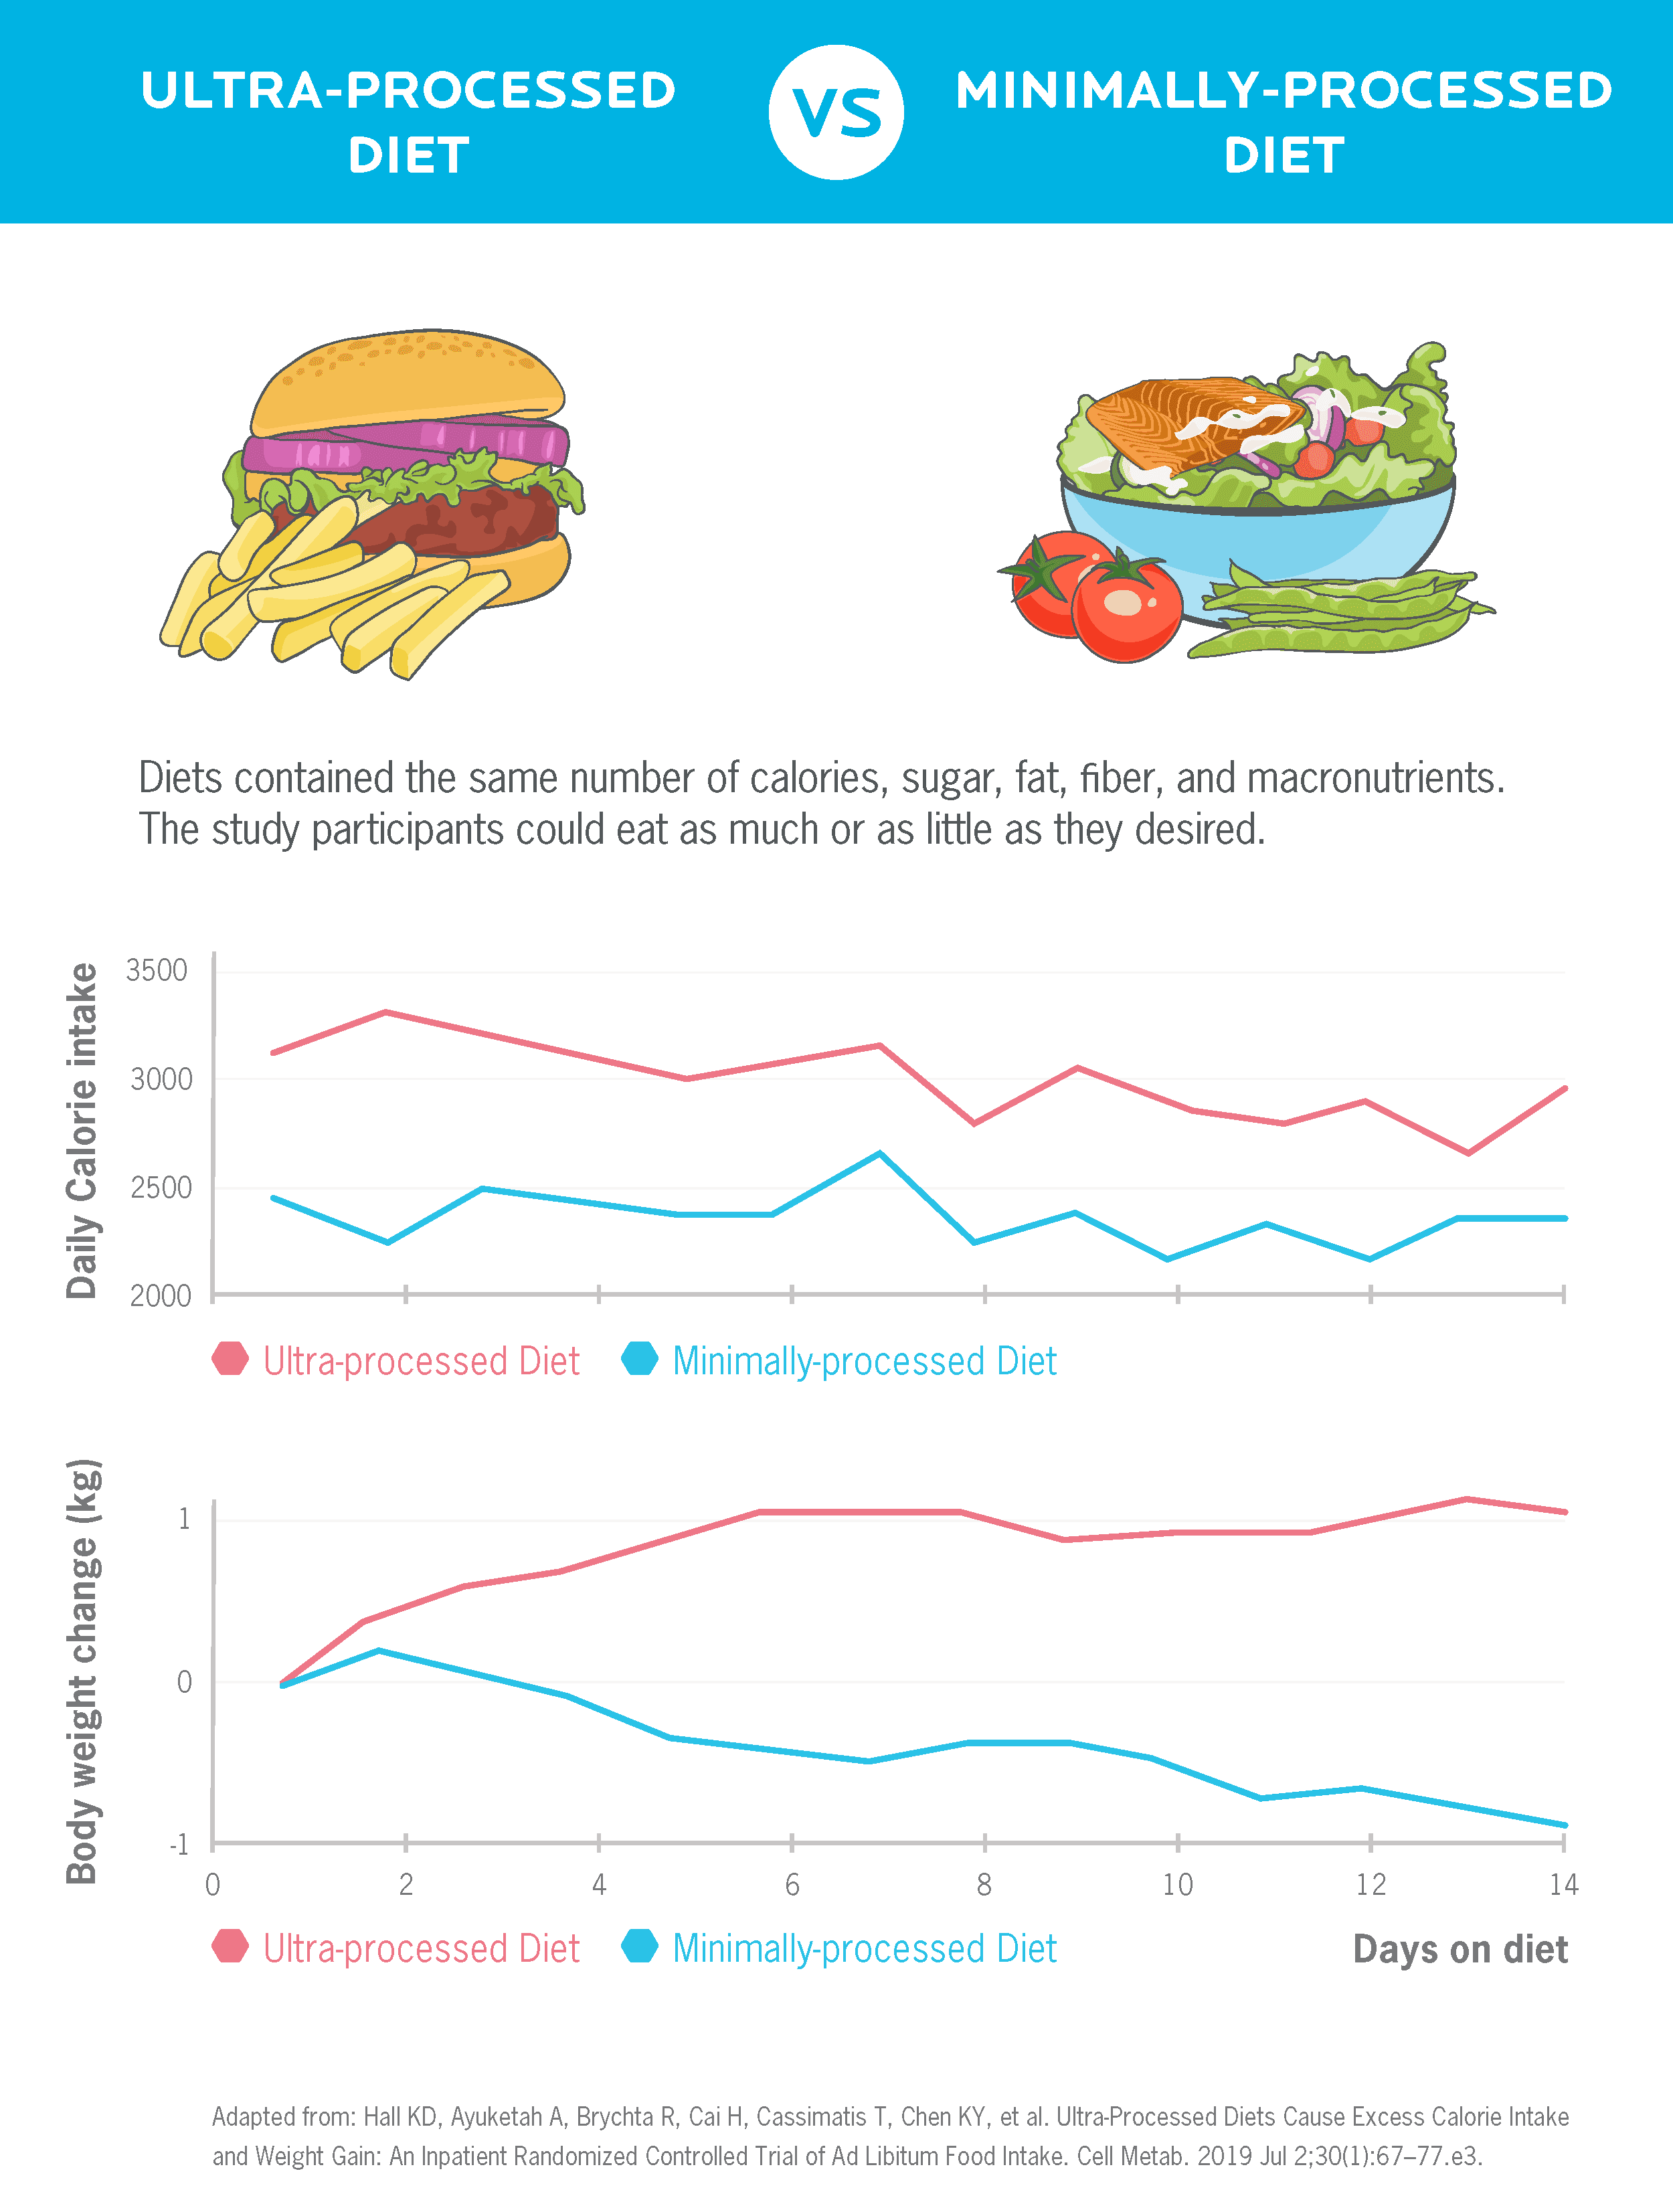 This shows study results of an ultra-processed diet versus a minimally-processed diet. Graphs show that people eating an ultra-processed diet ate more calories and gained weight, while those eating a minimally-processed diet ate fewer calories and lost weight.